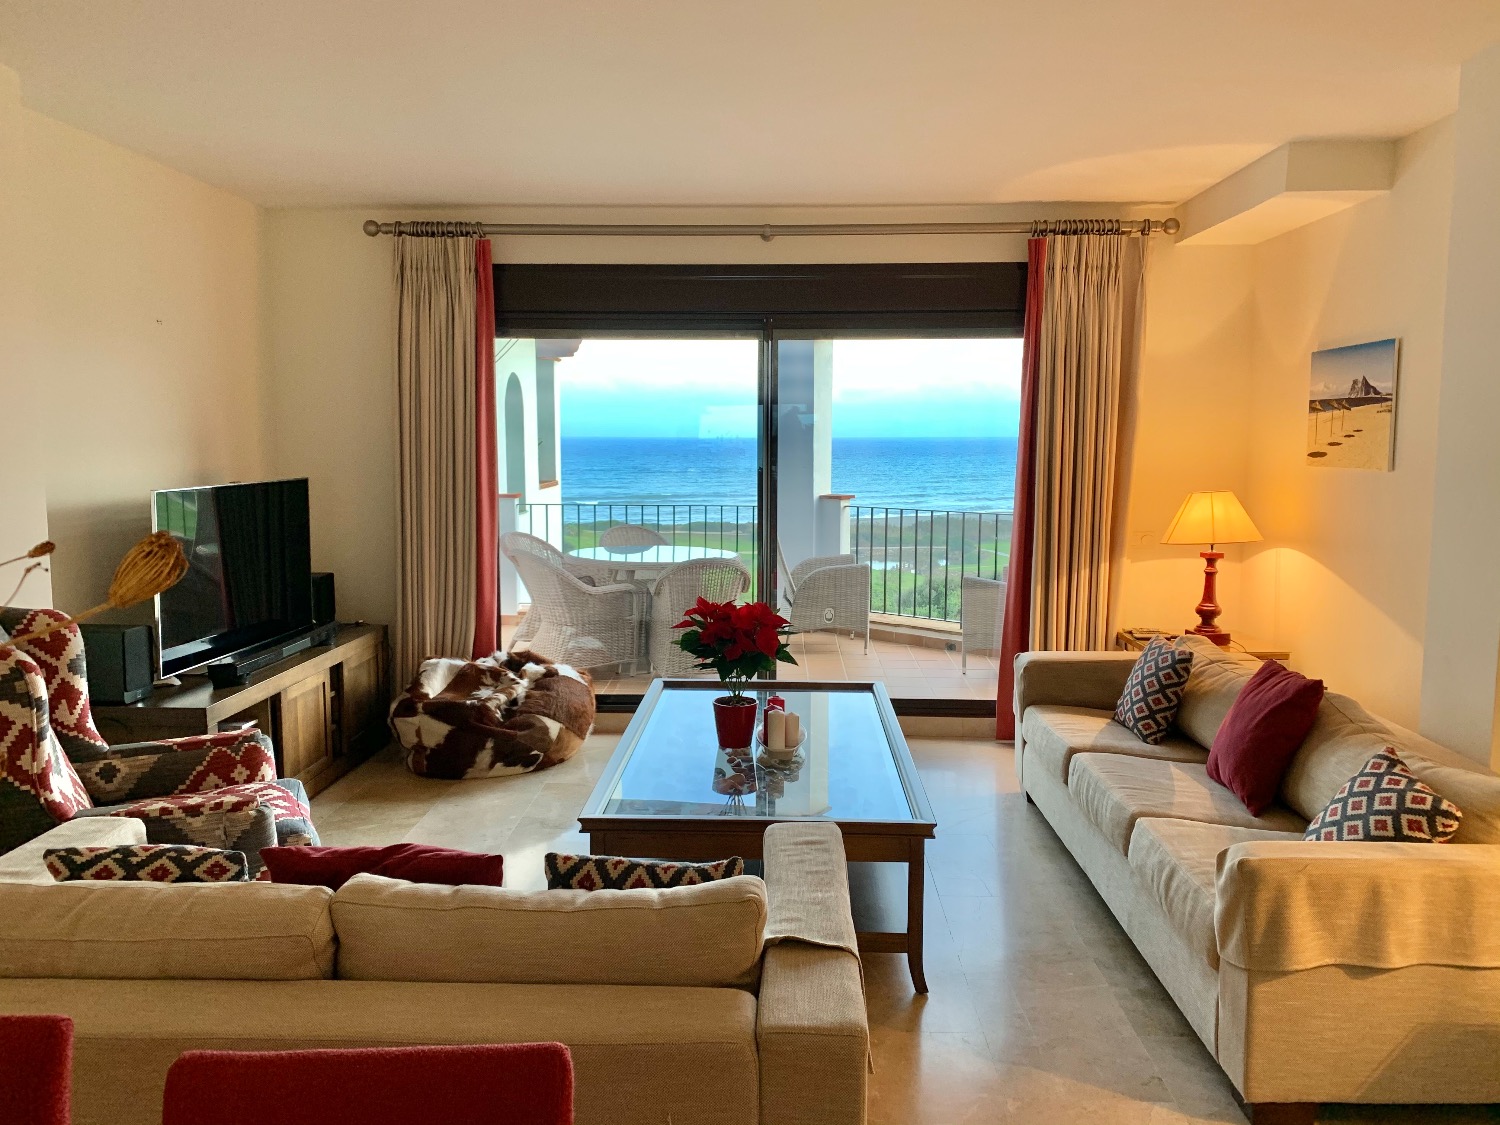 Spectacular sea views from this beautiful apartment located on the beachfront